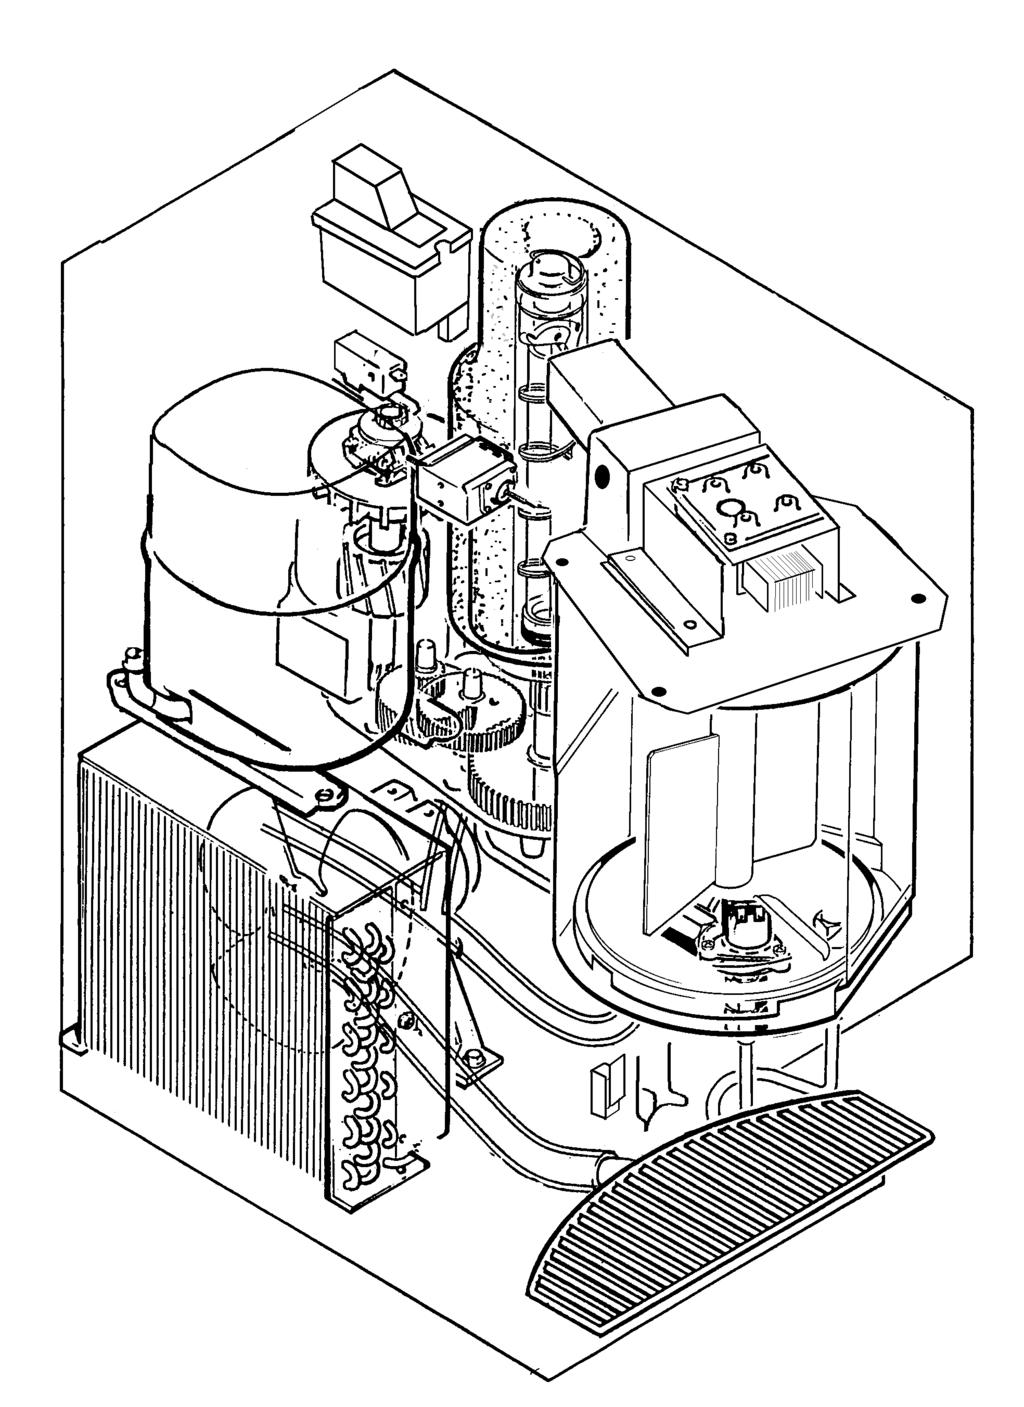 Component Location & Function Evaporator. This is a vertical cylinder full of water and refrigerated. Also in the cylinder is a slowly rotating auger.